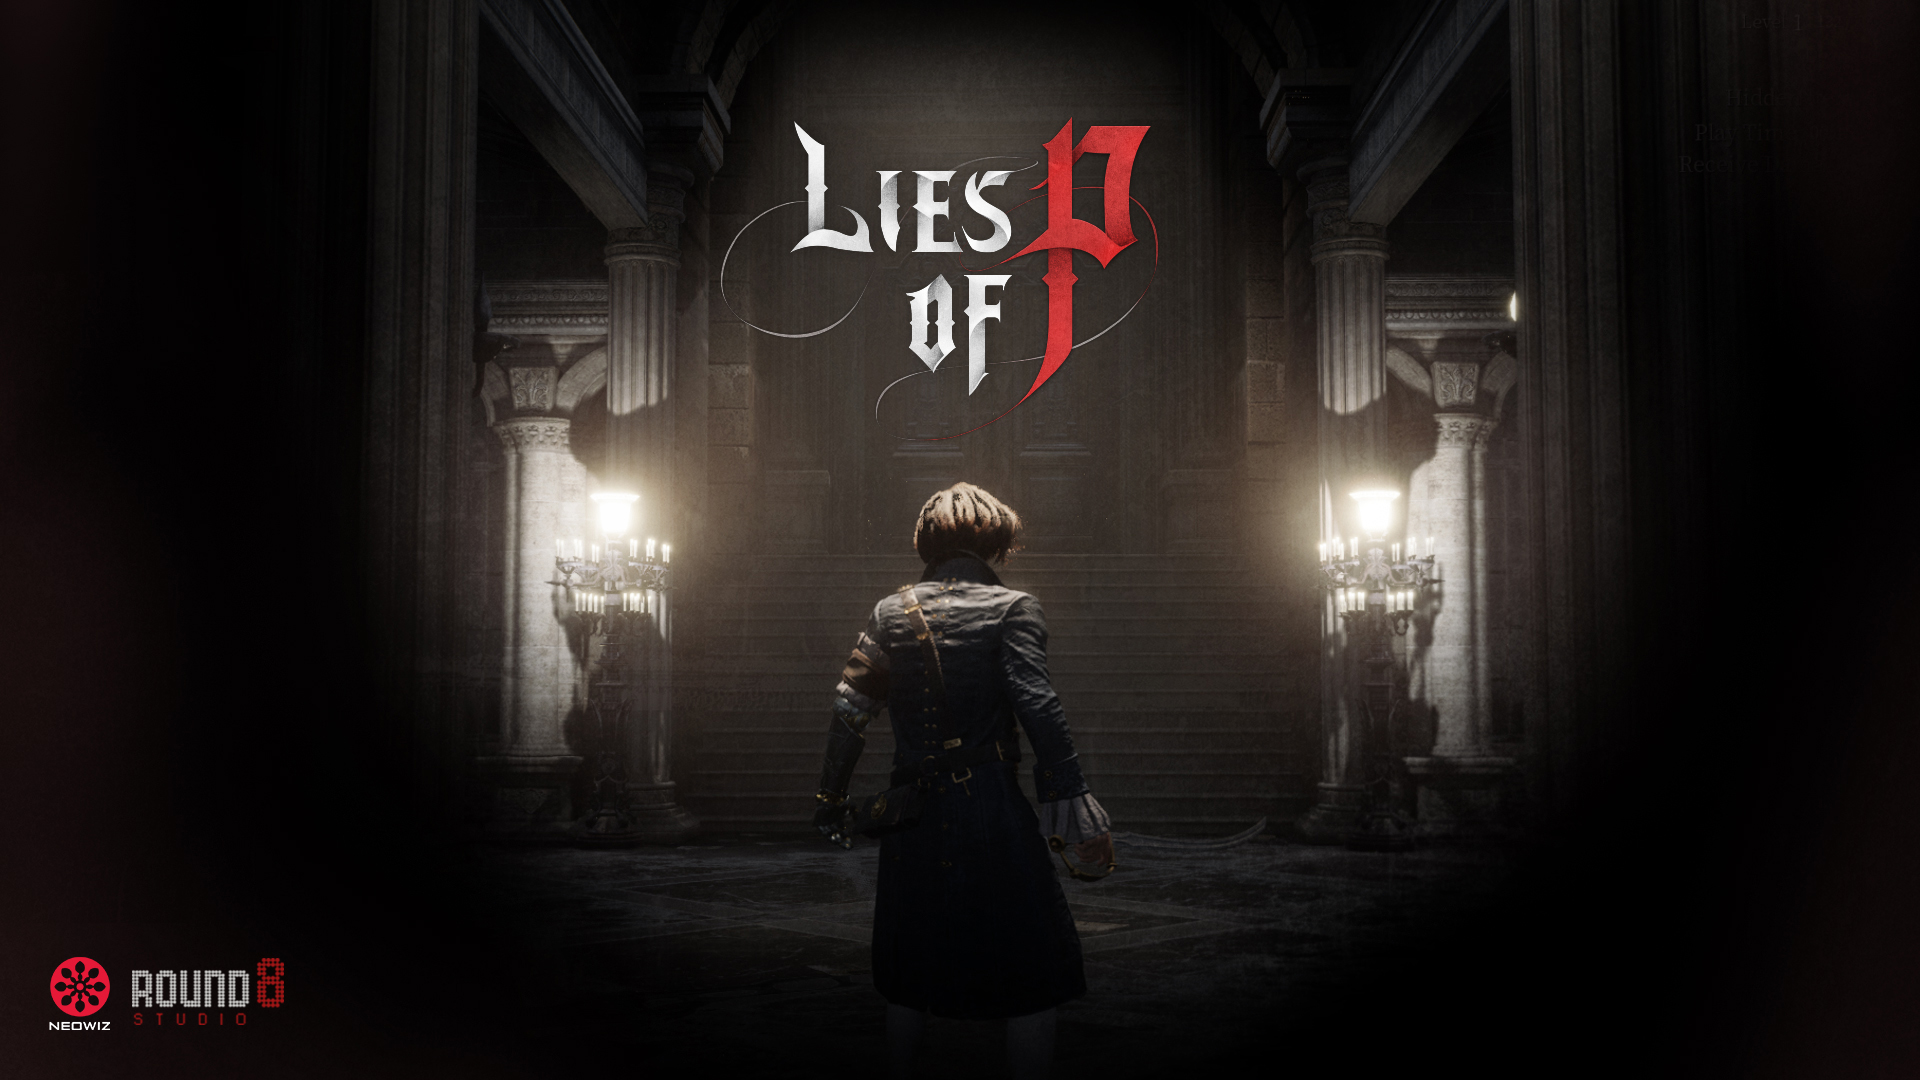 Lies of P Review: Once Upon a Soulslike